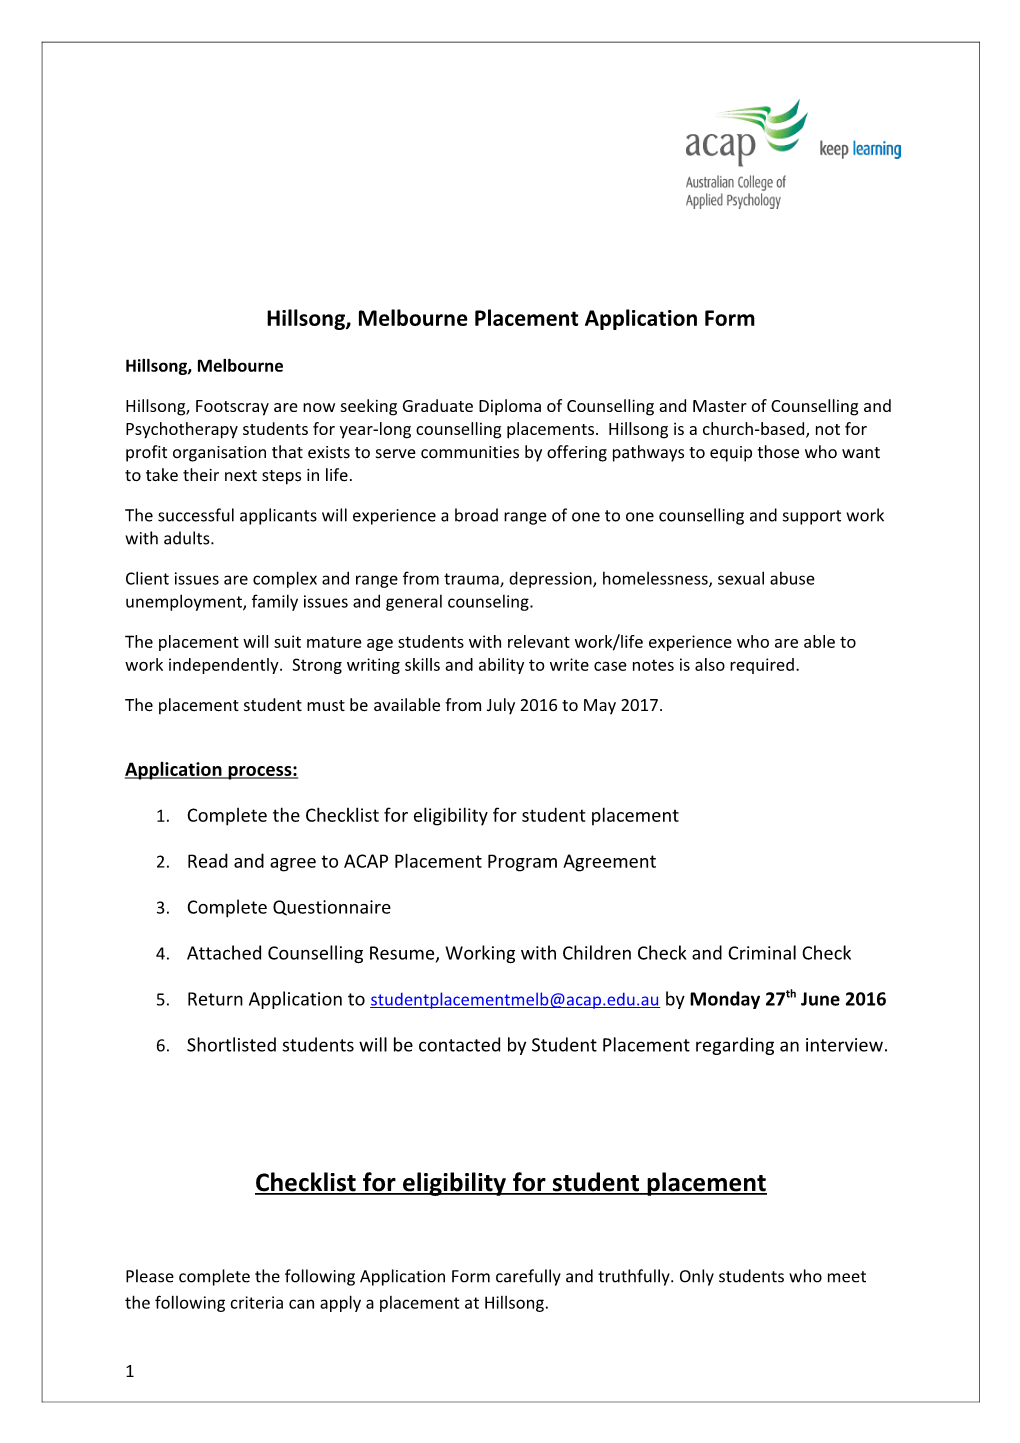 Hillsong, Melbourneplacement Application Form